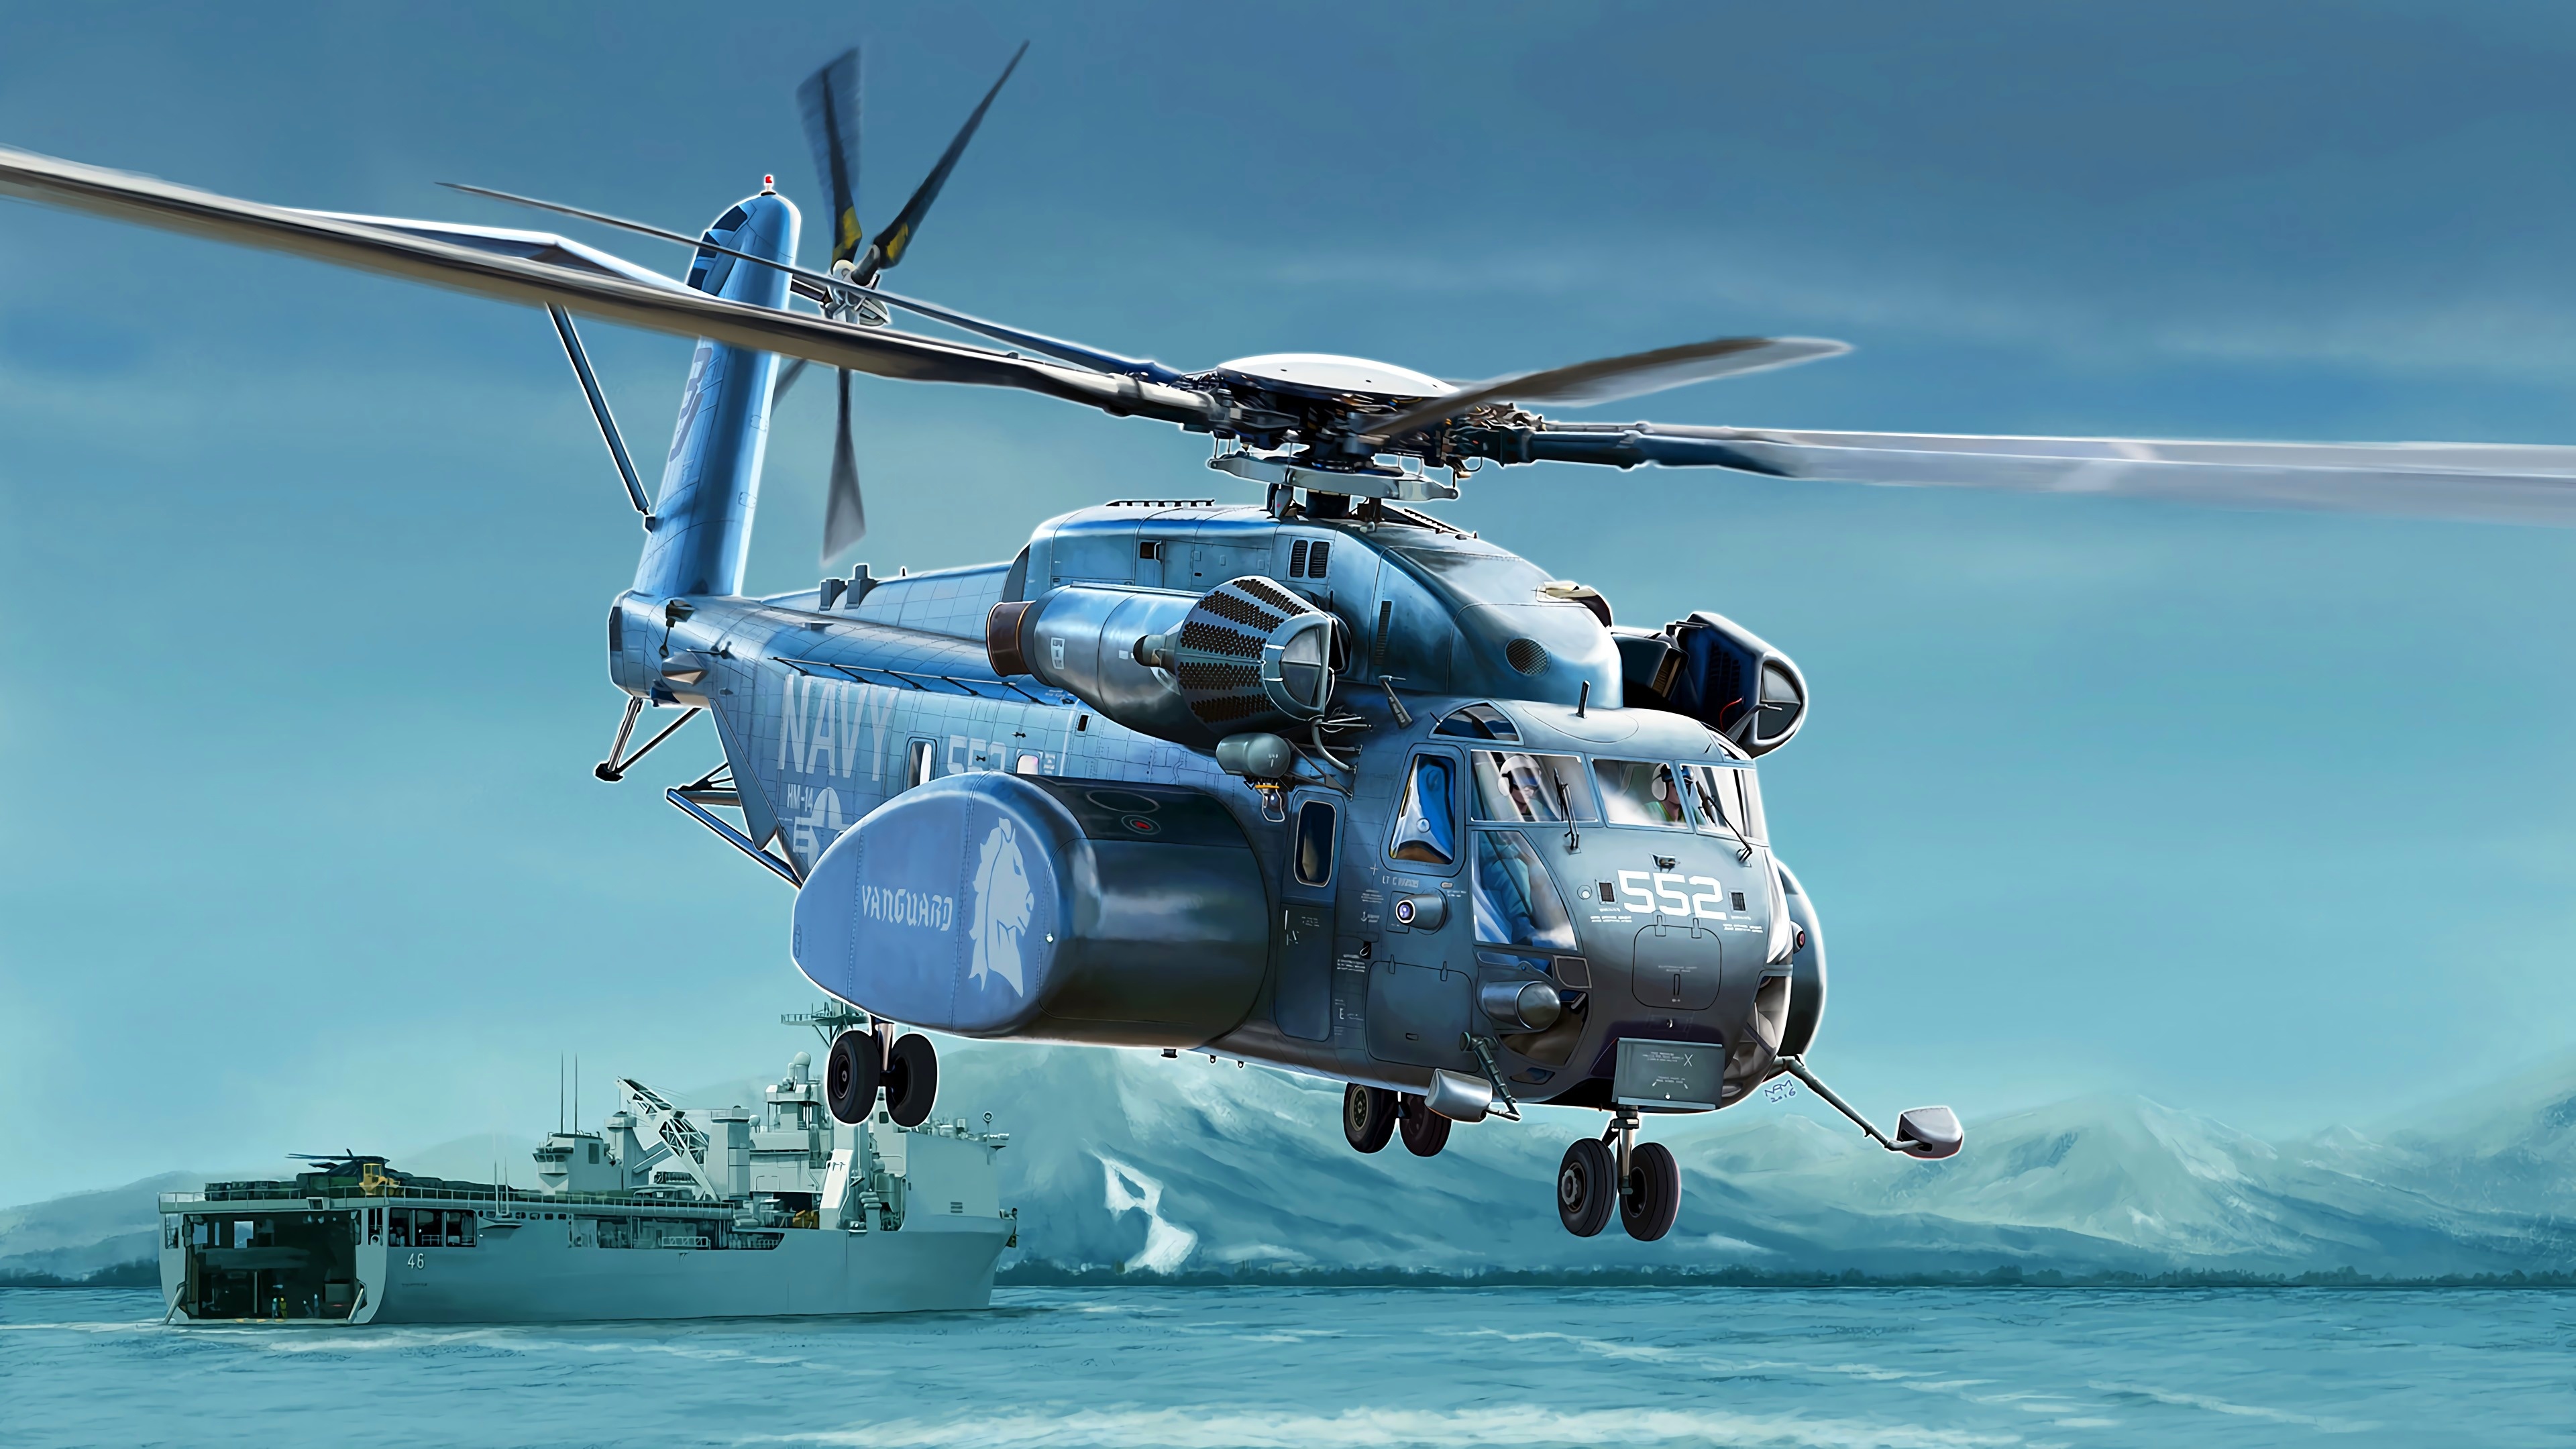 Helicopters_Painting_Art_US_Navy_MH-53E_Sea_Dragon_573408_3840x2160.jpg